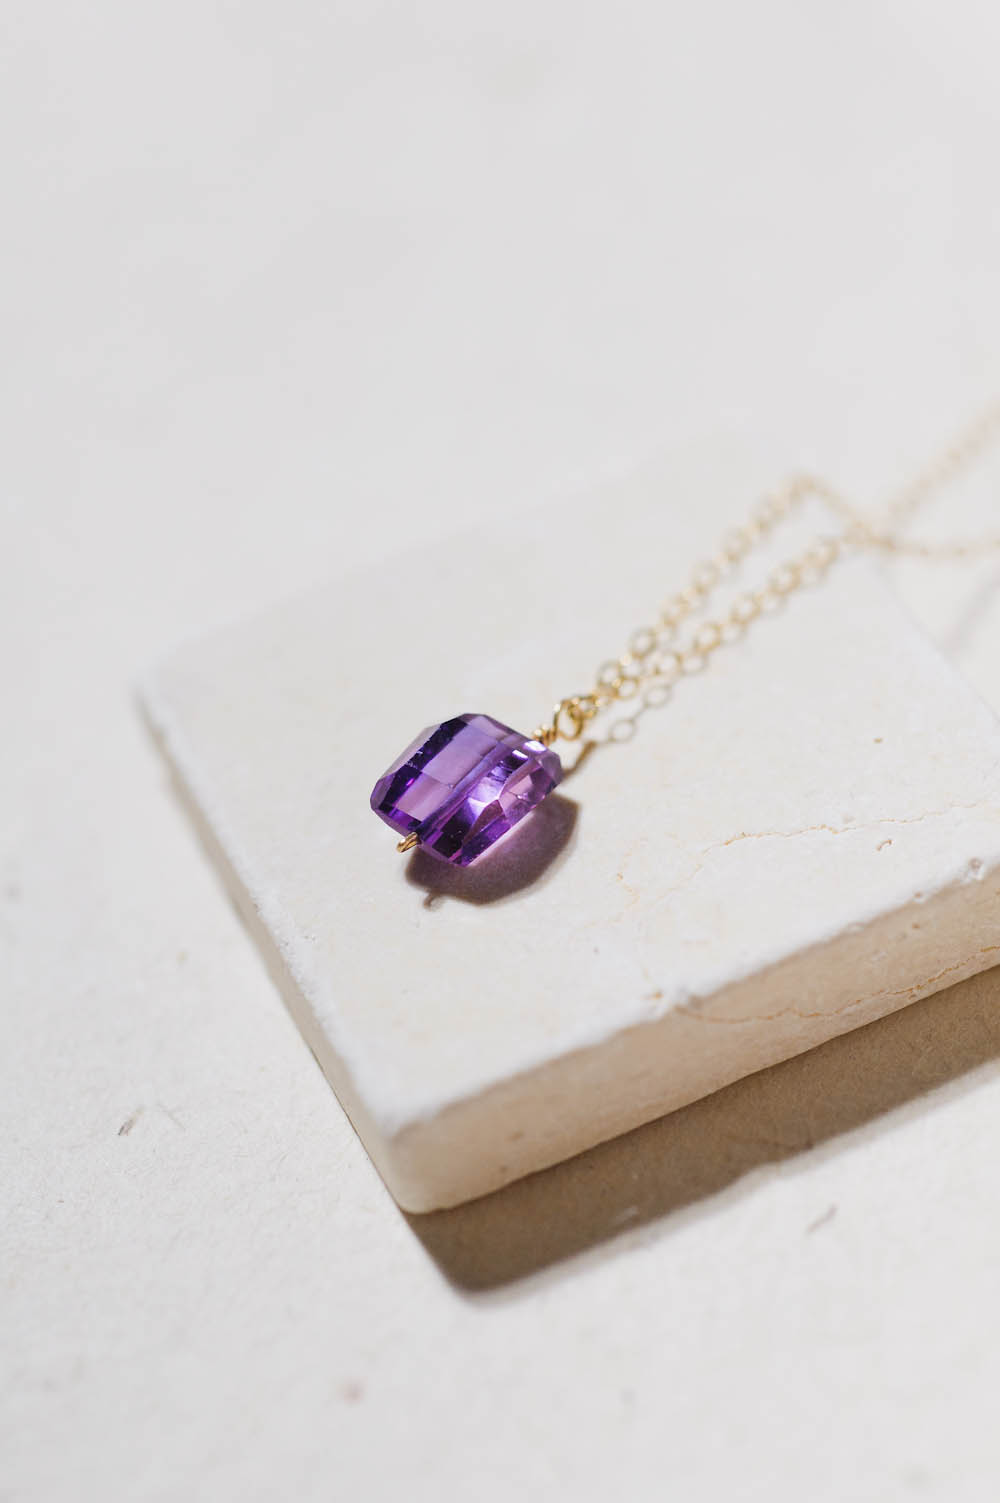 Am Gold|22k Gold Plated Amethyst Pendant Necklace - Fine Jewelry For Women